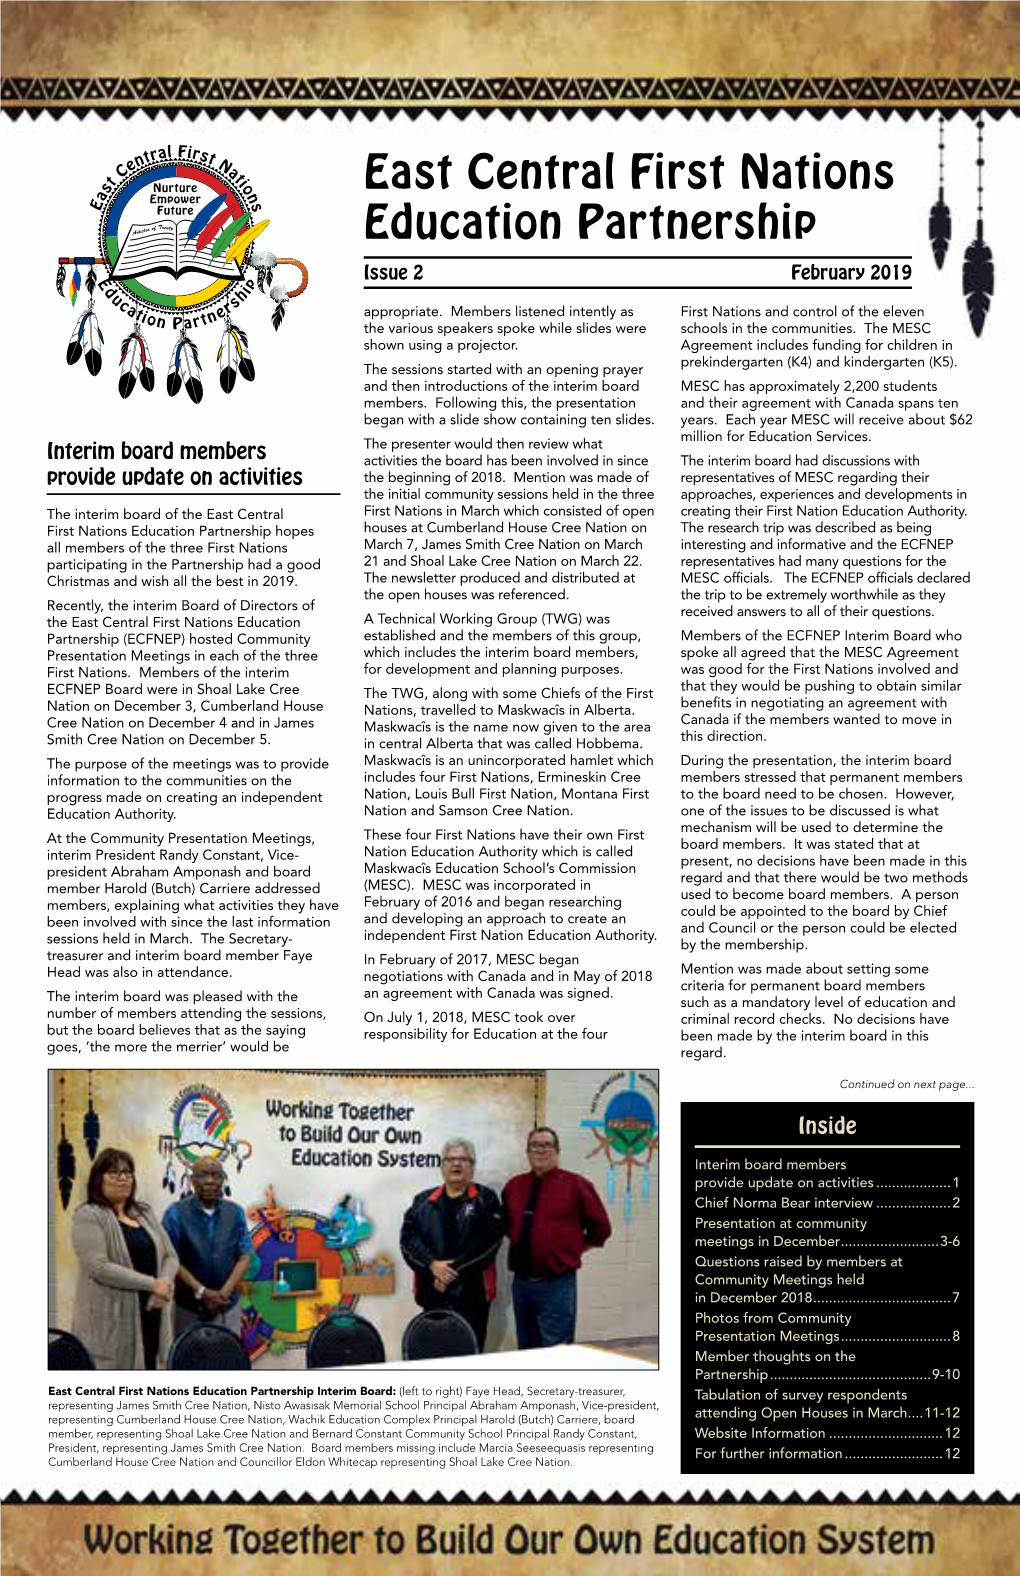 East Central First Nations Education Partnership